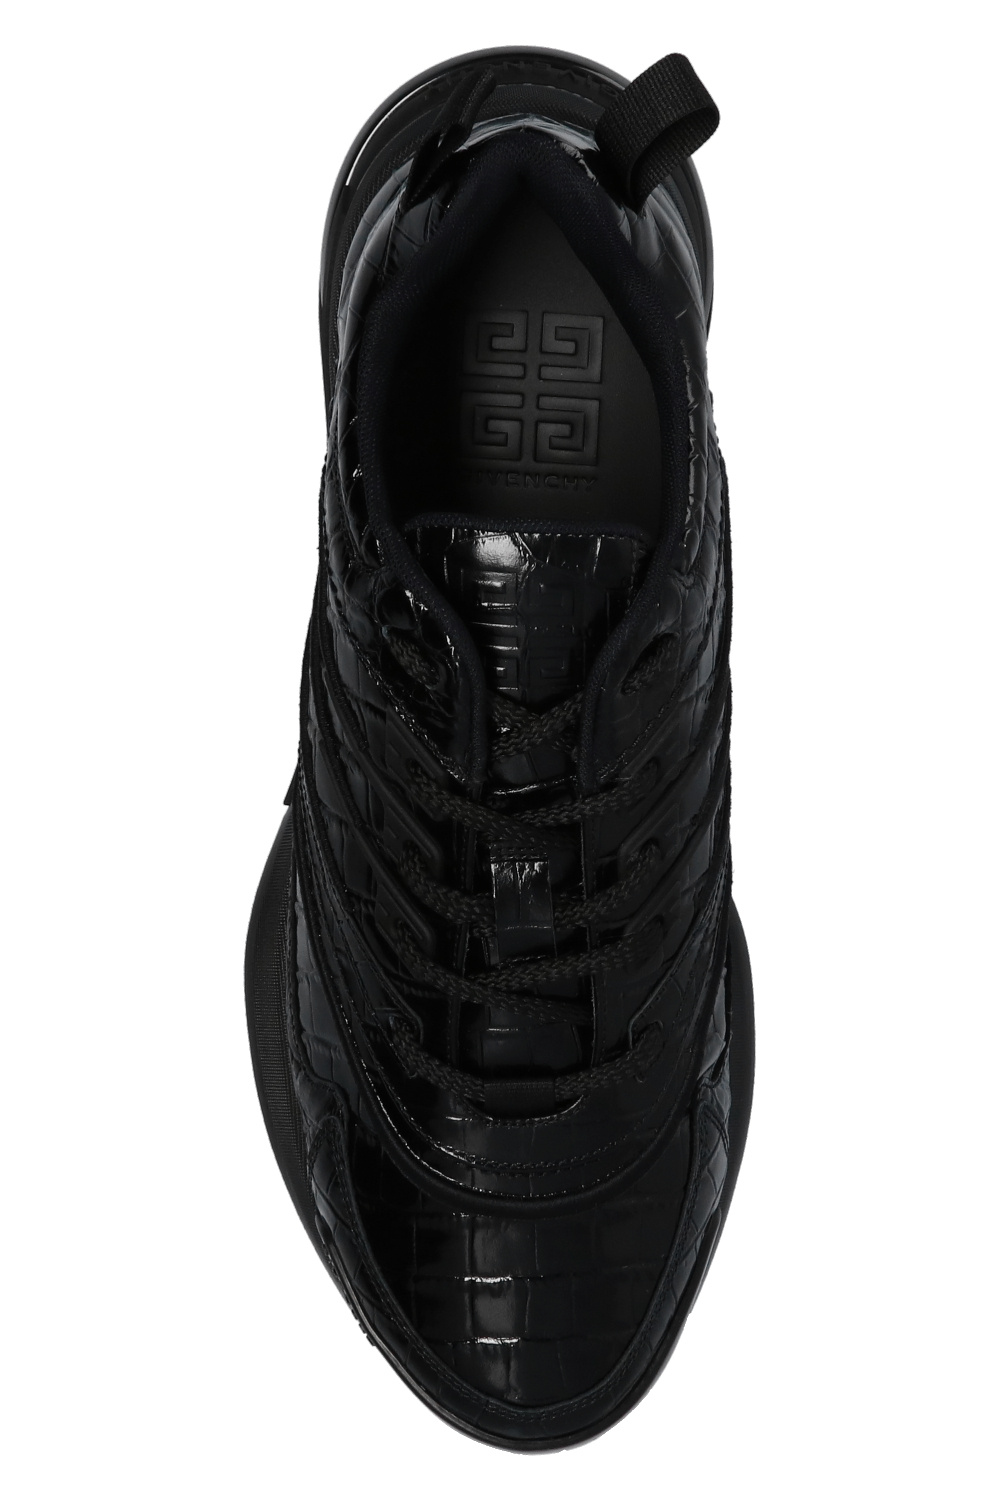 givenchy denim ‘Giv’ sneakers